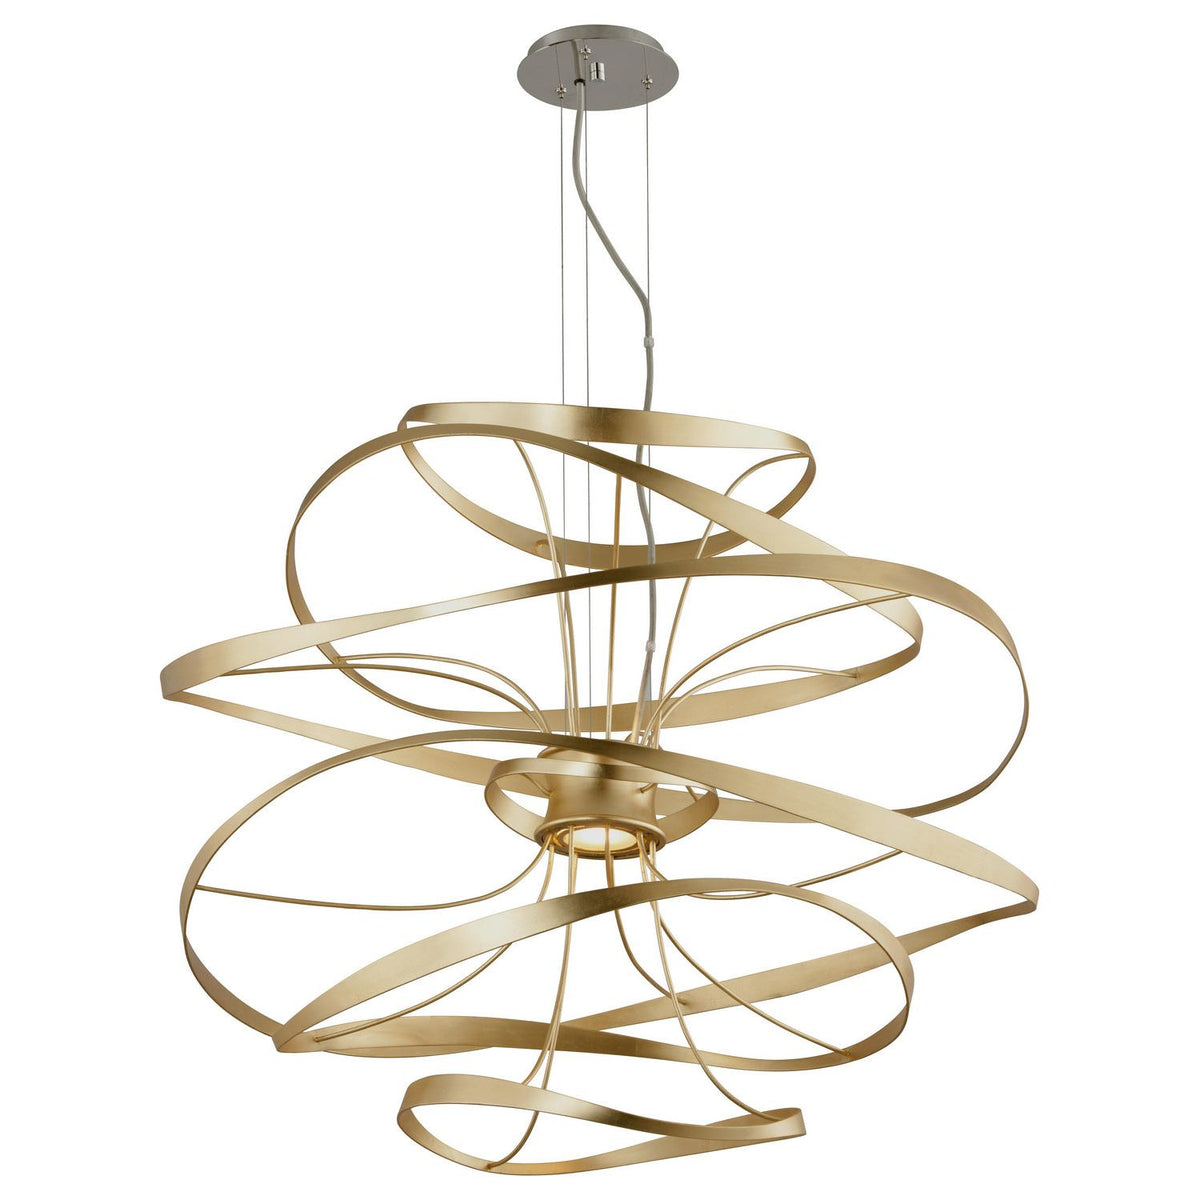 Corbett Lighting - 216-43-GL/SS - LED Chandelier - Calligraphy - Gold Leaf W Polished Stainless